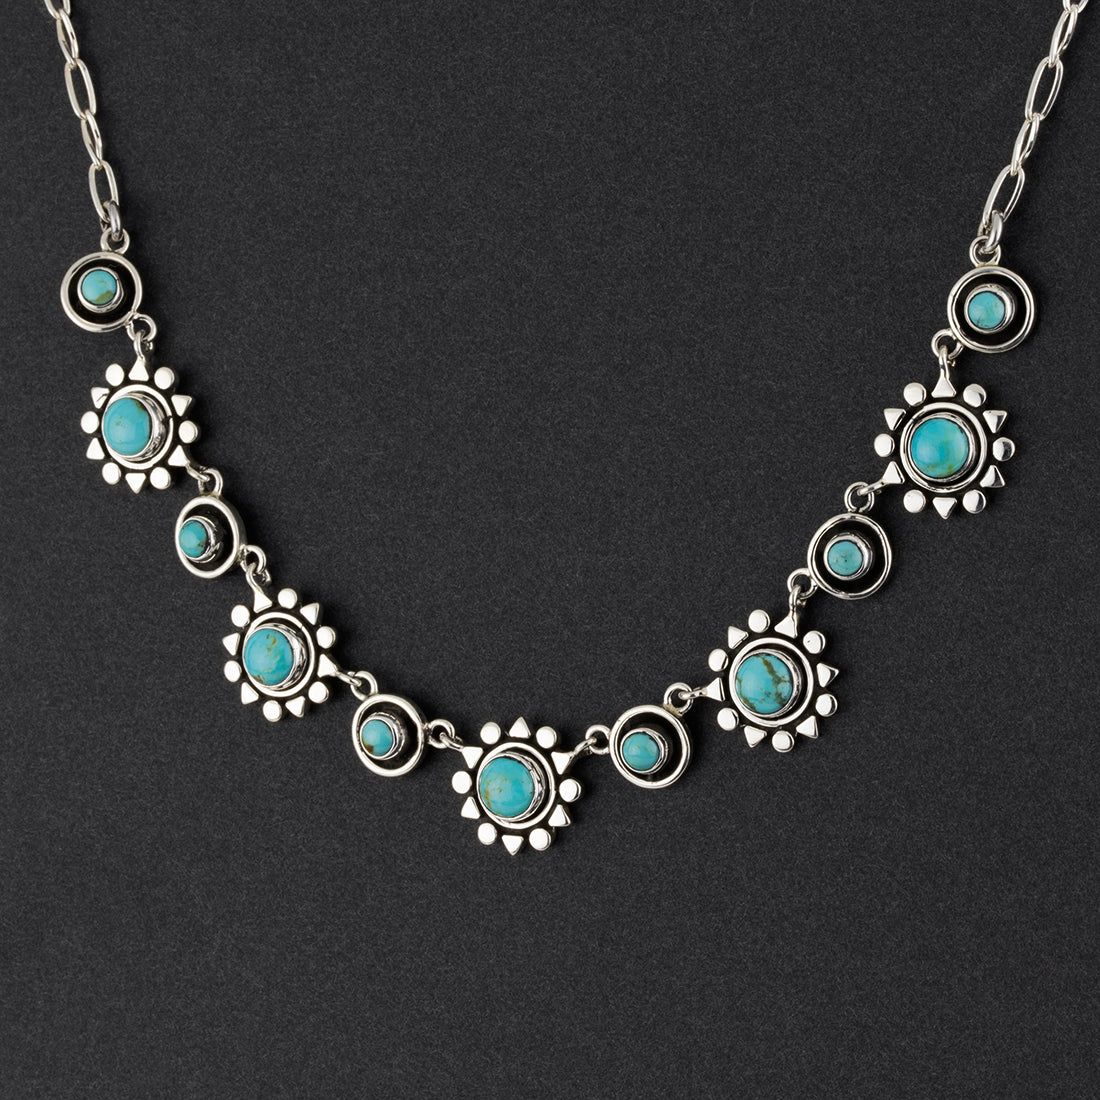 Mexican silver and turquoise sun necklace